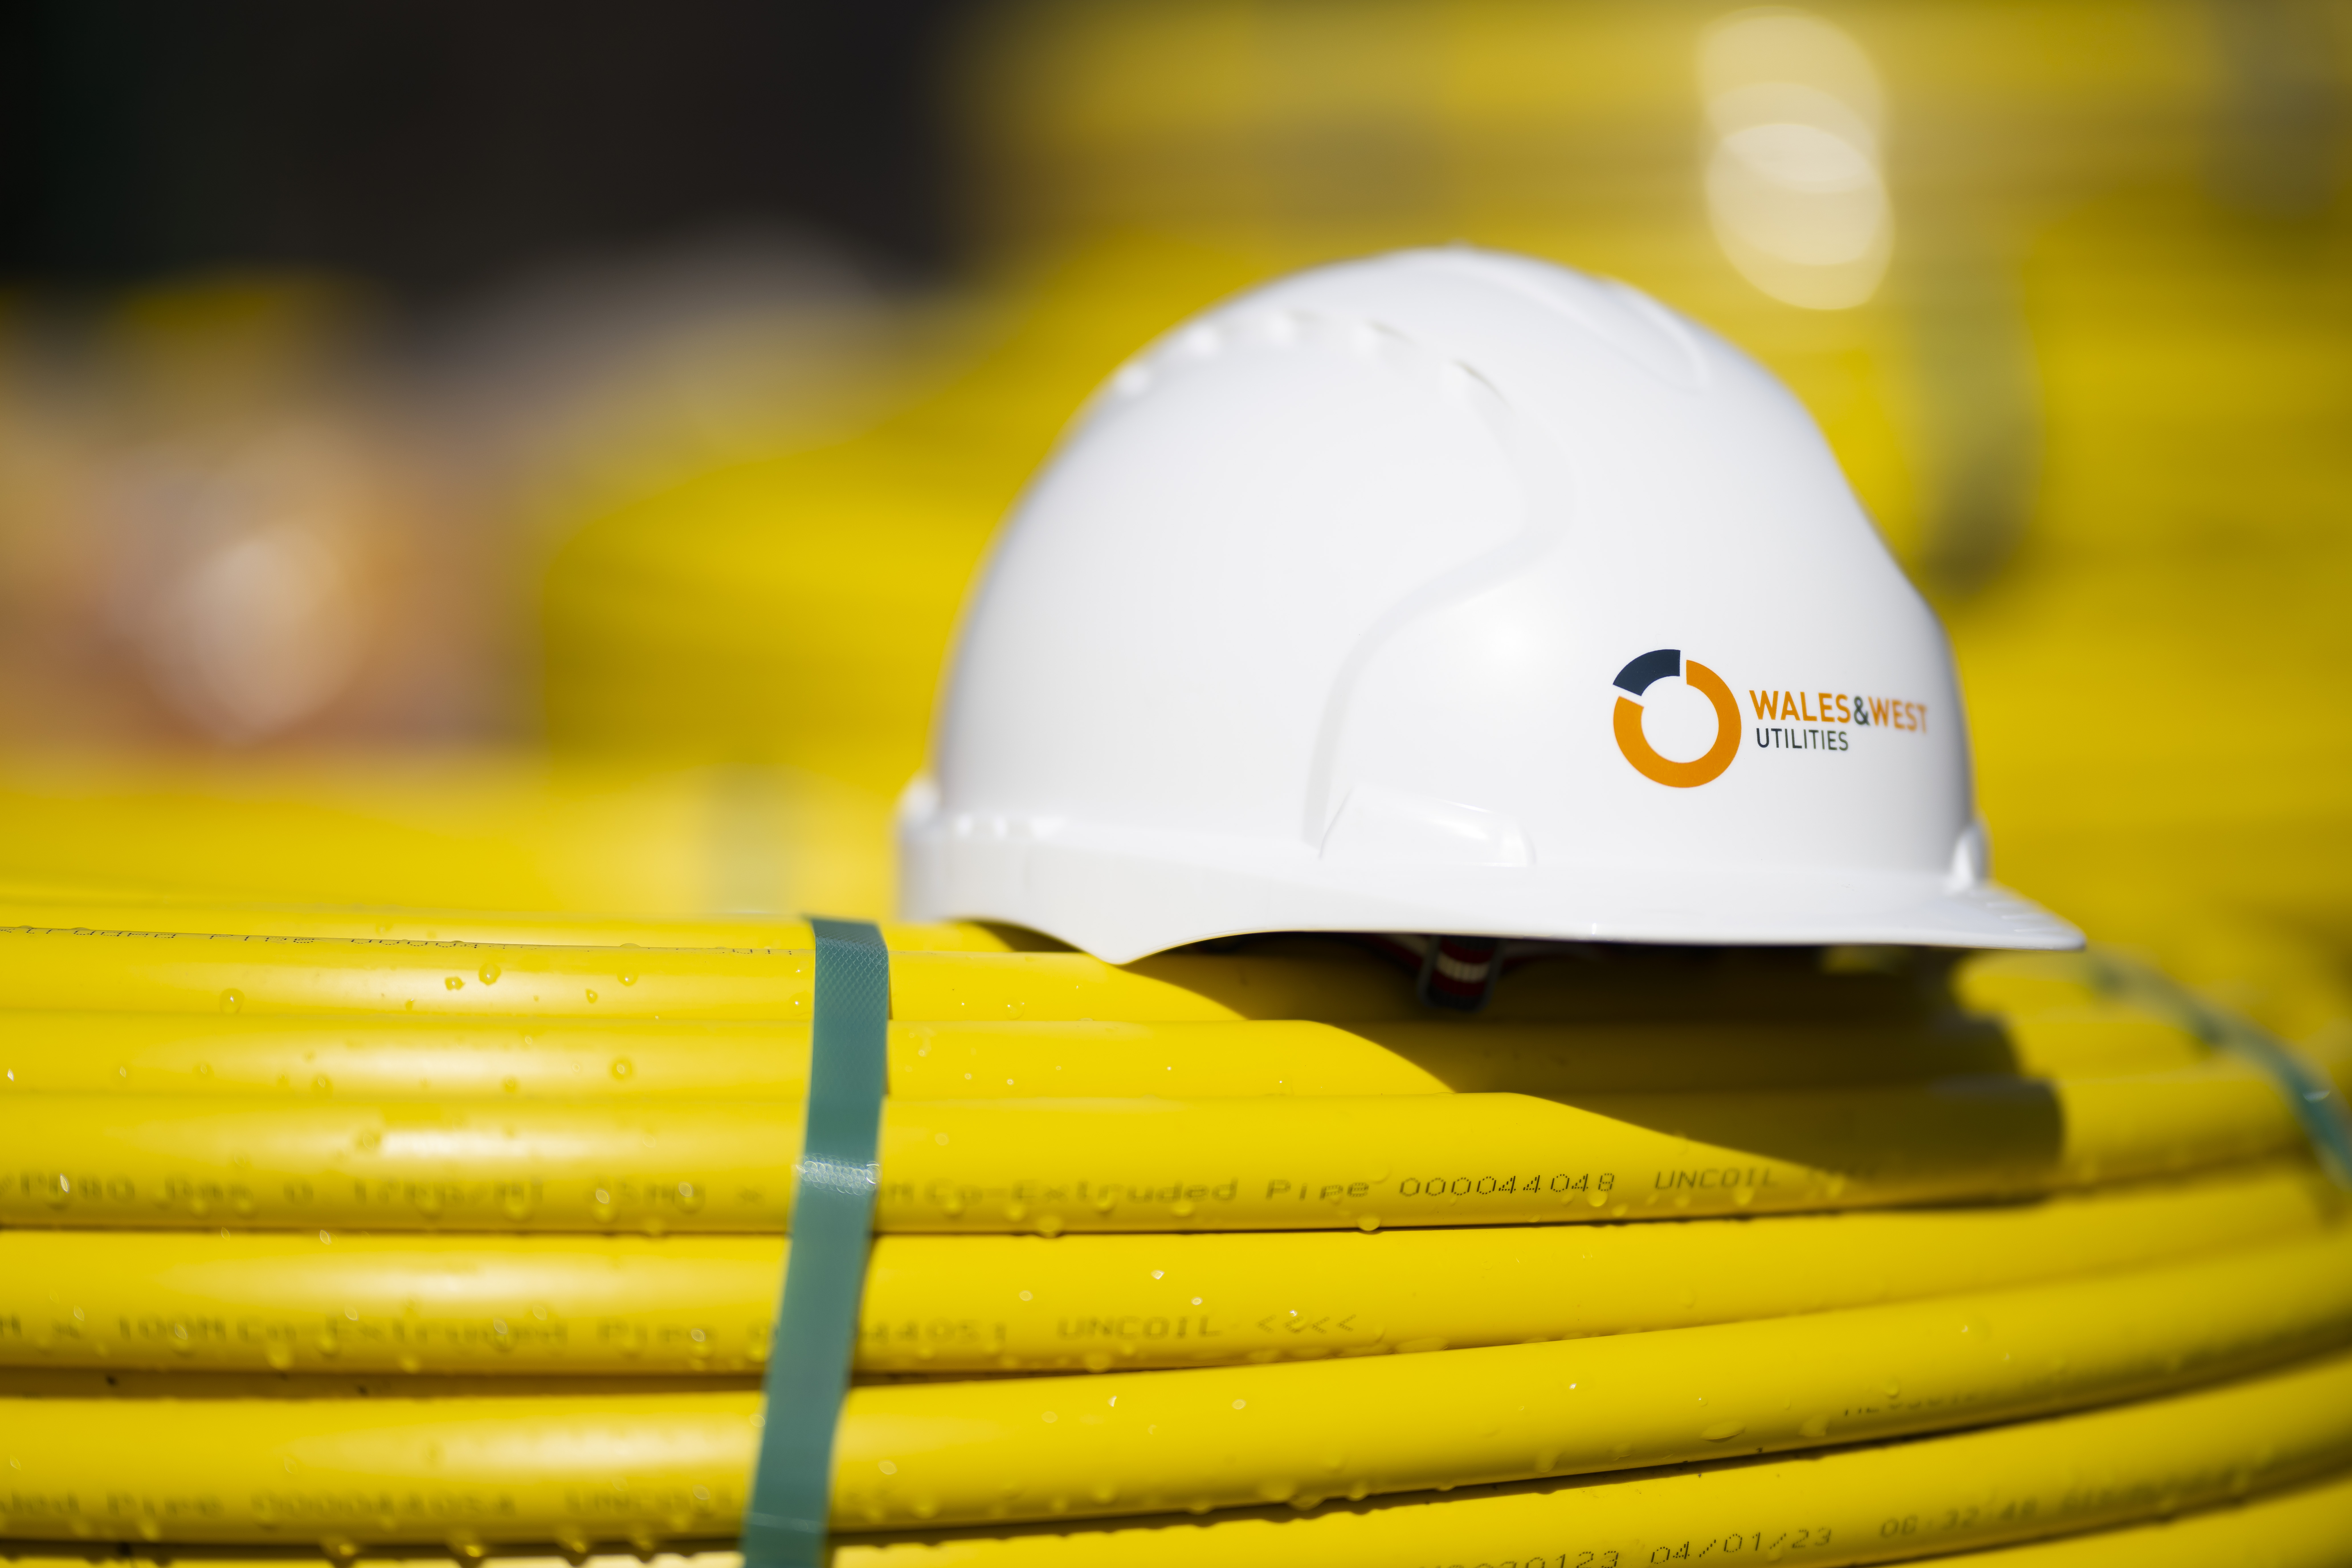 Yellow pipes stacked with white safety helmet WWU logo